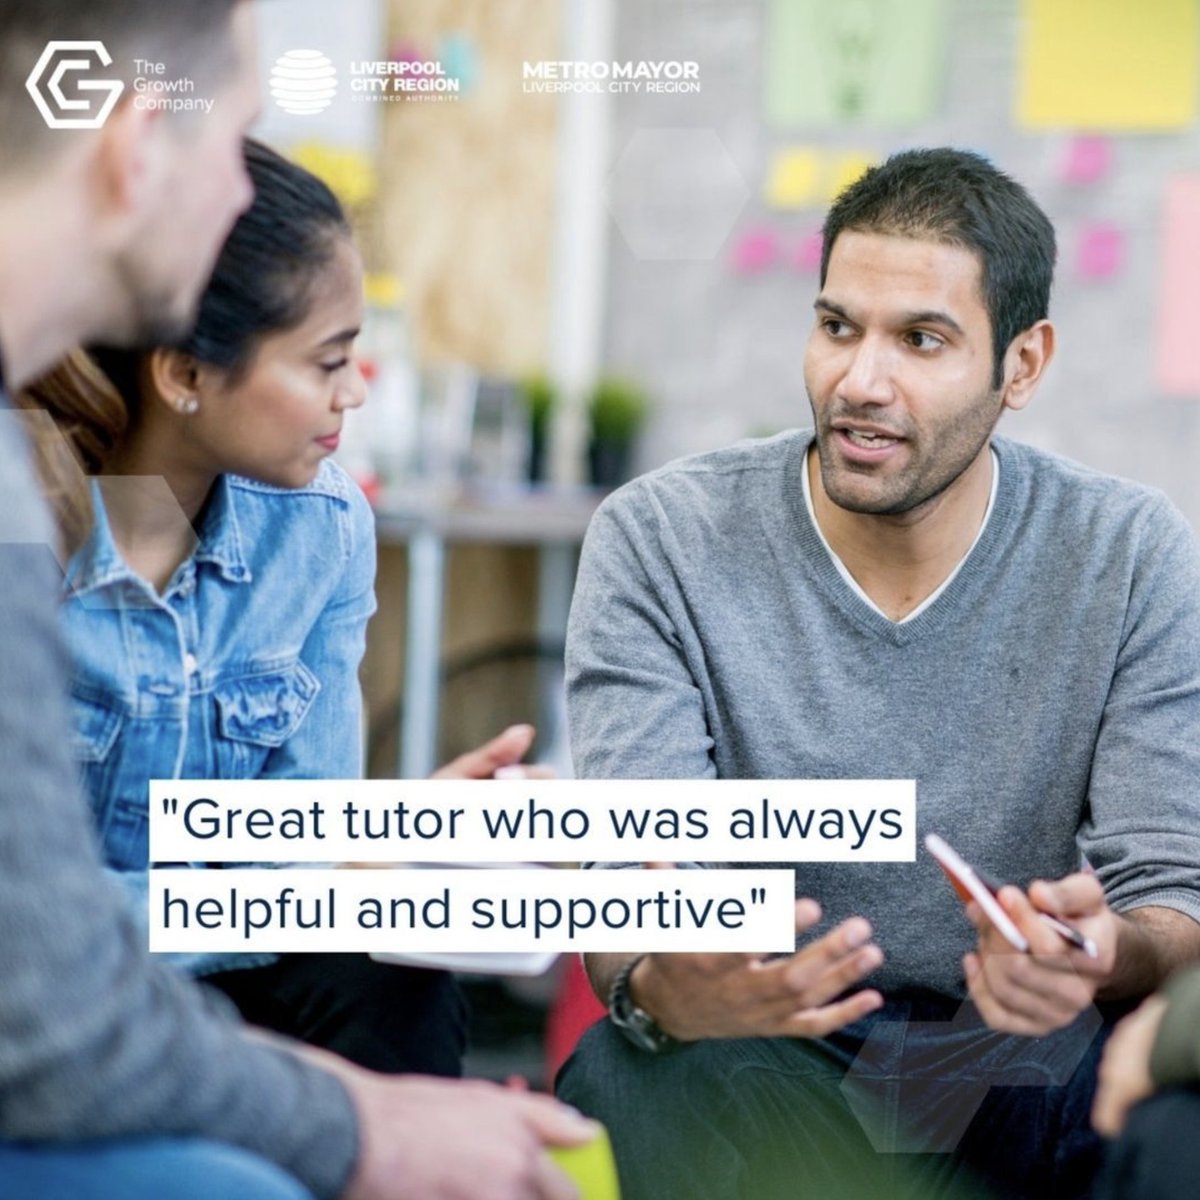 Our dedicated personal tutors are always on hand to help. ⠀ ⠀ We're here to support you every step of the way, whether that's searching for a new role, gaining new skills, and even when you are in employment. ⠀ ⠀ Get in touch today to find out more ⠀ #liverpoolemployment